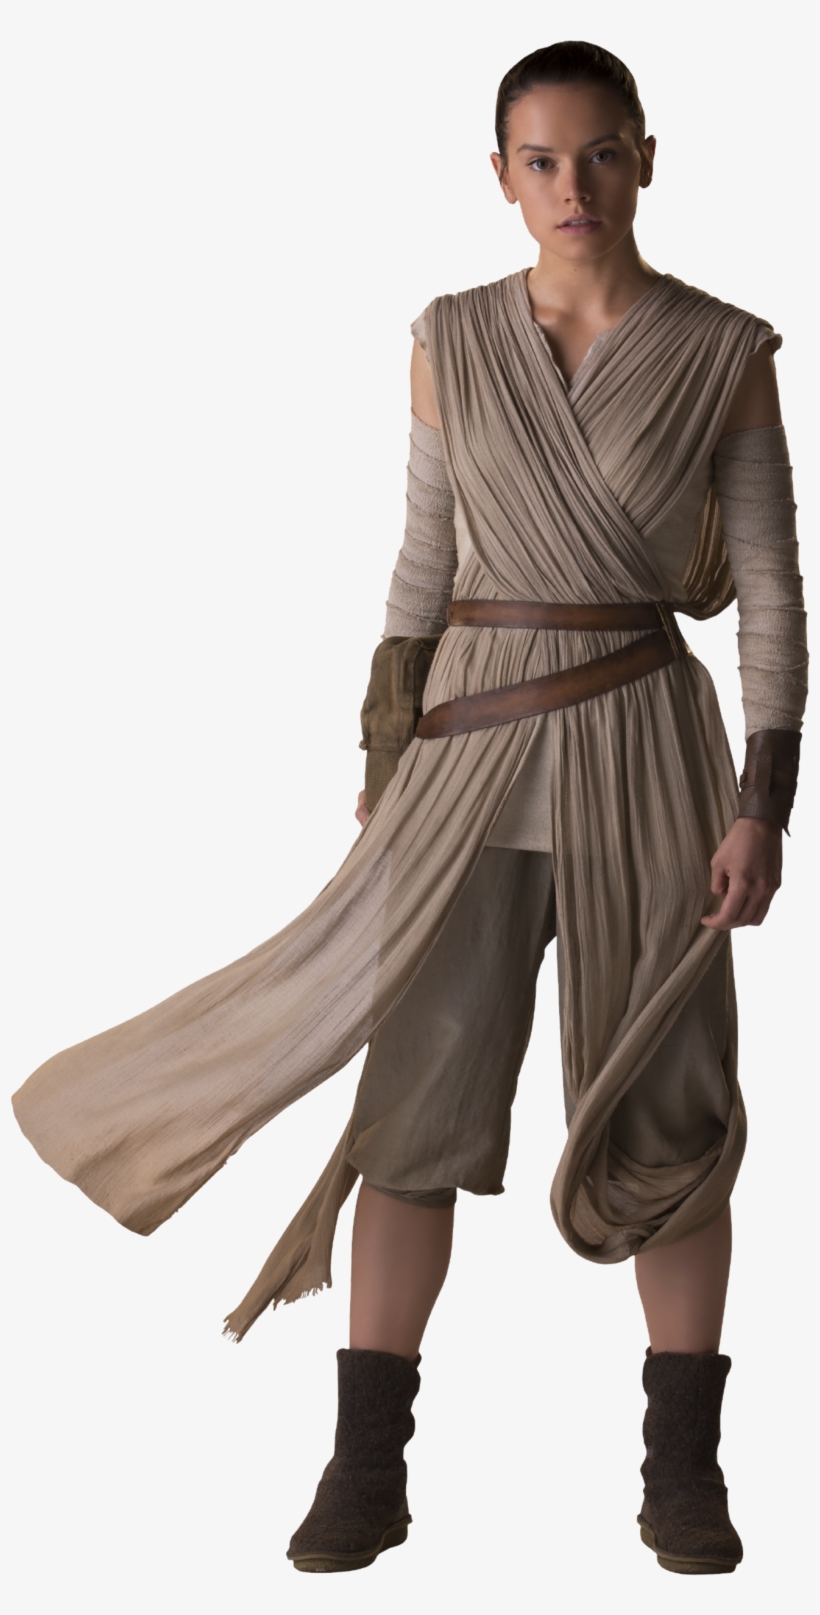 Star Wars Character Rey - Cosplay Costume Rey Star Wars The Force Awakens, transparent png #1489907